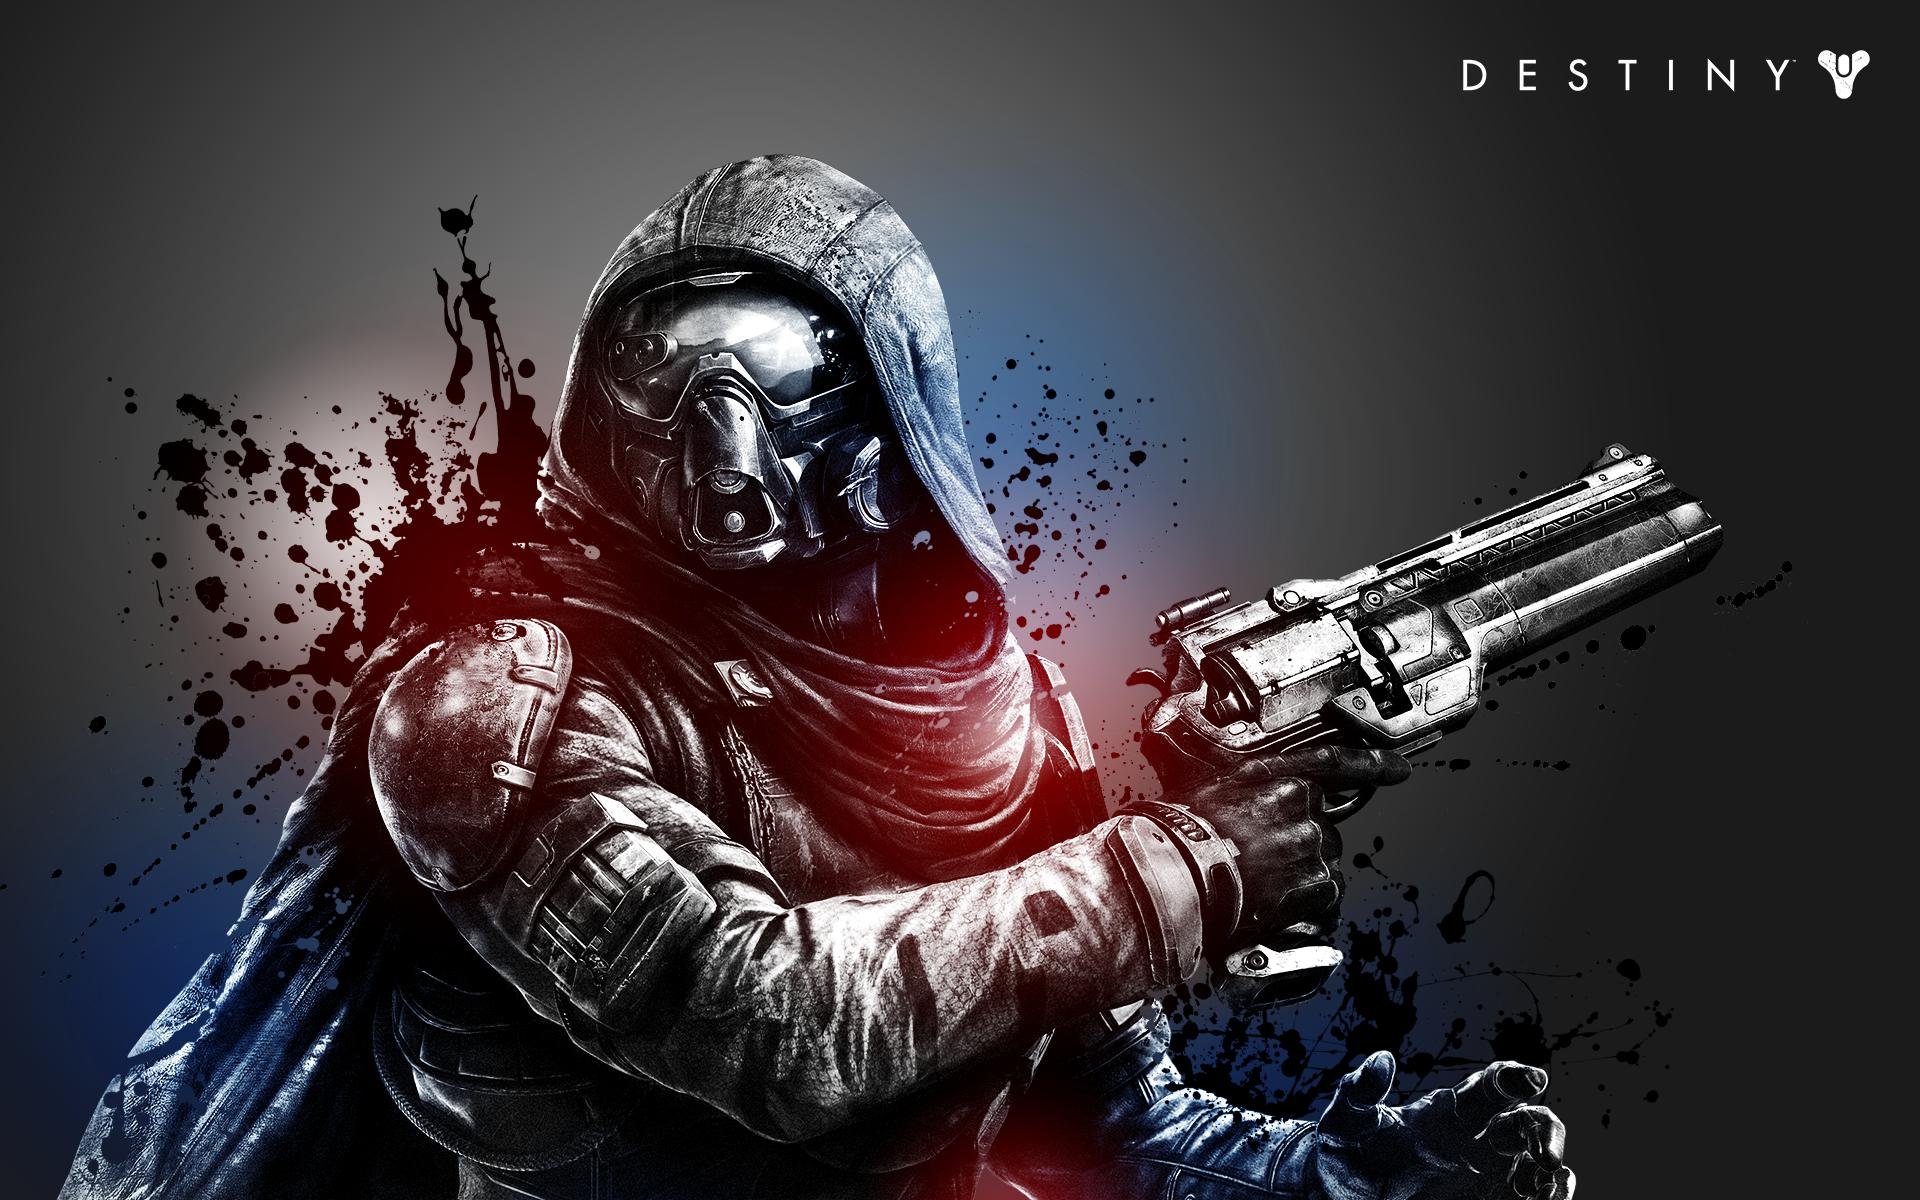 cool destiny wallpapers,shooter game,pc game,fictional character,movie,action film